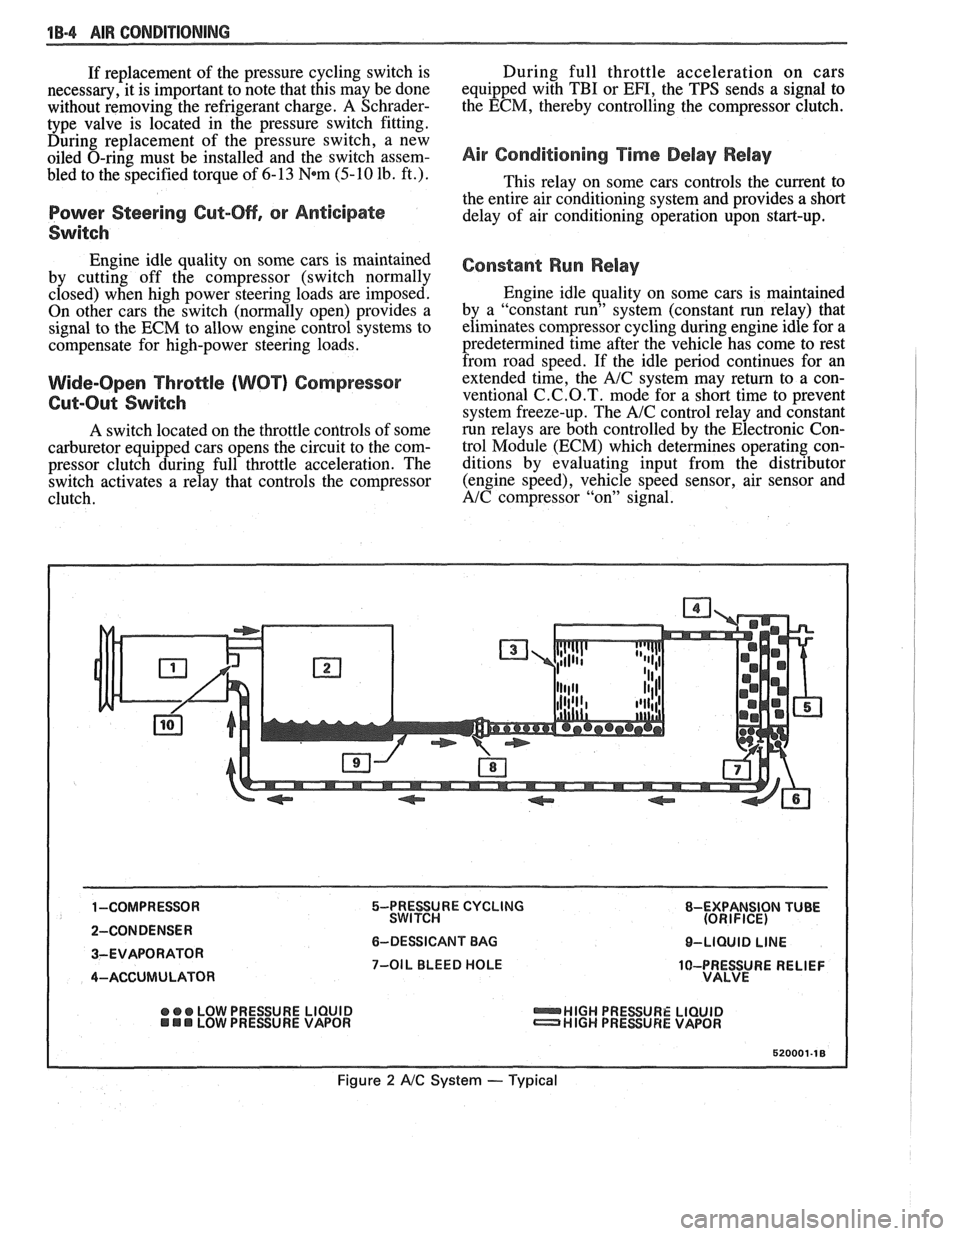 PONTIAC FIERO 1988  Service Repair Manual 
18-4 AIR CONDITIONING 
If replacement  of the pressure  cycling  switch  is 
necessary,  it is  important  to note that this  may be done 
without  removing  the refrigerant  charge. 
A Schrader- 
ty